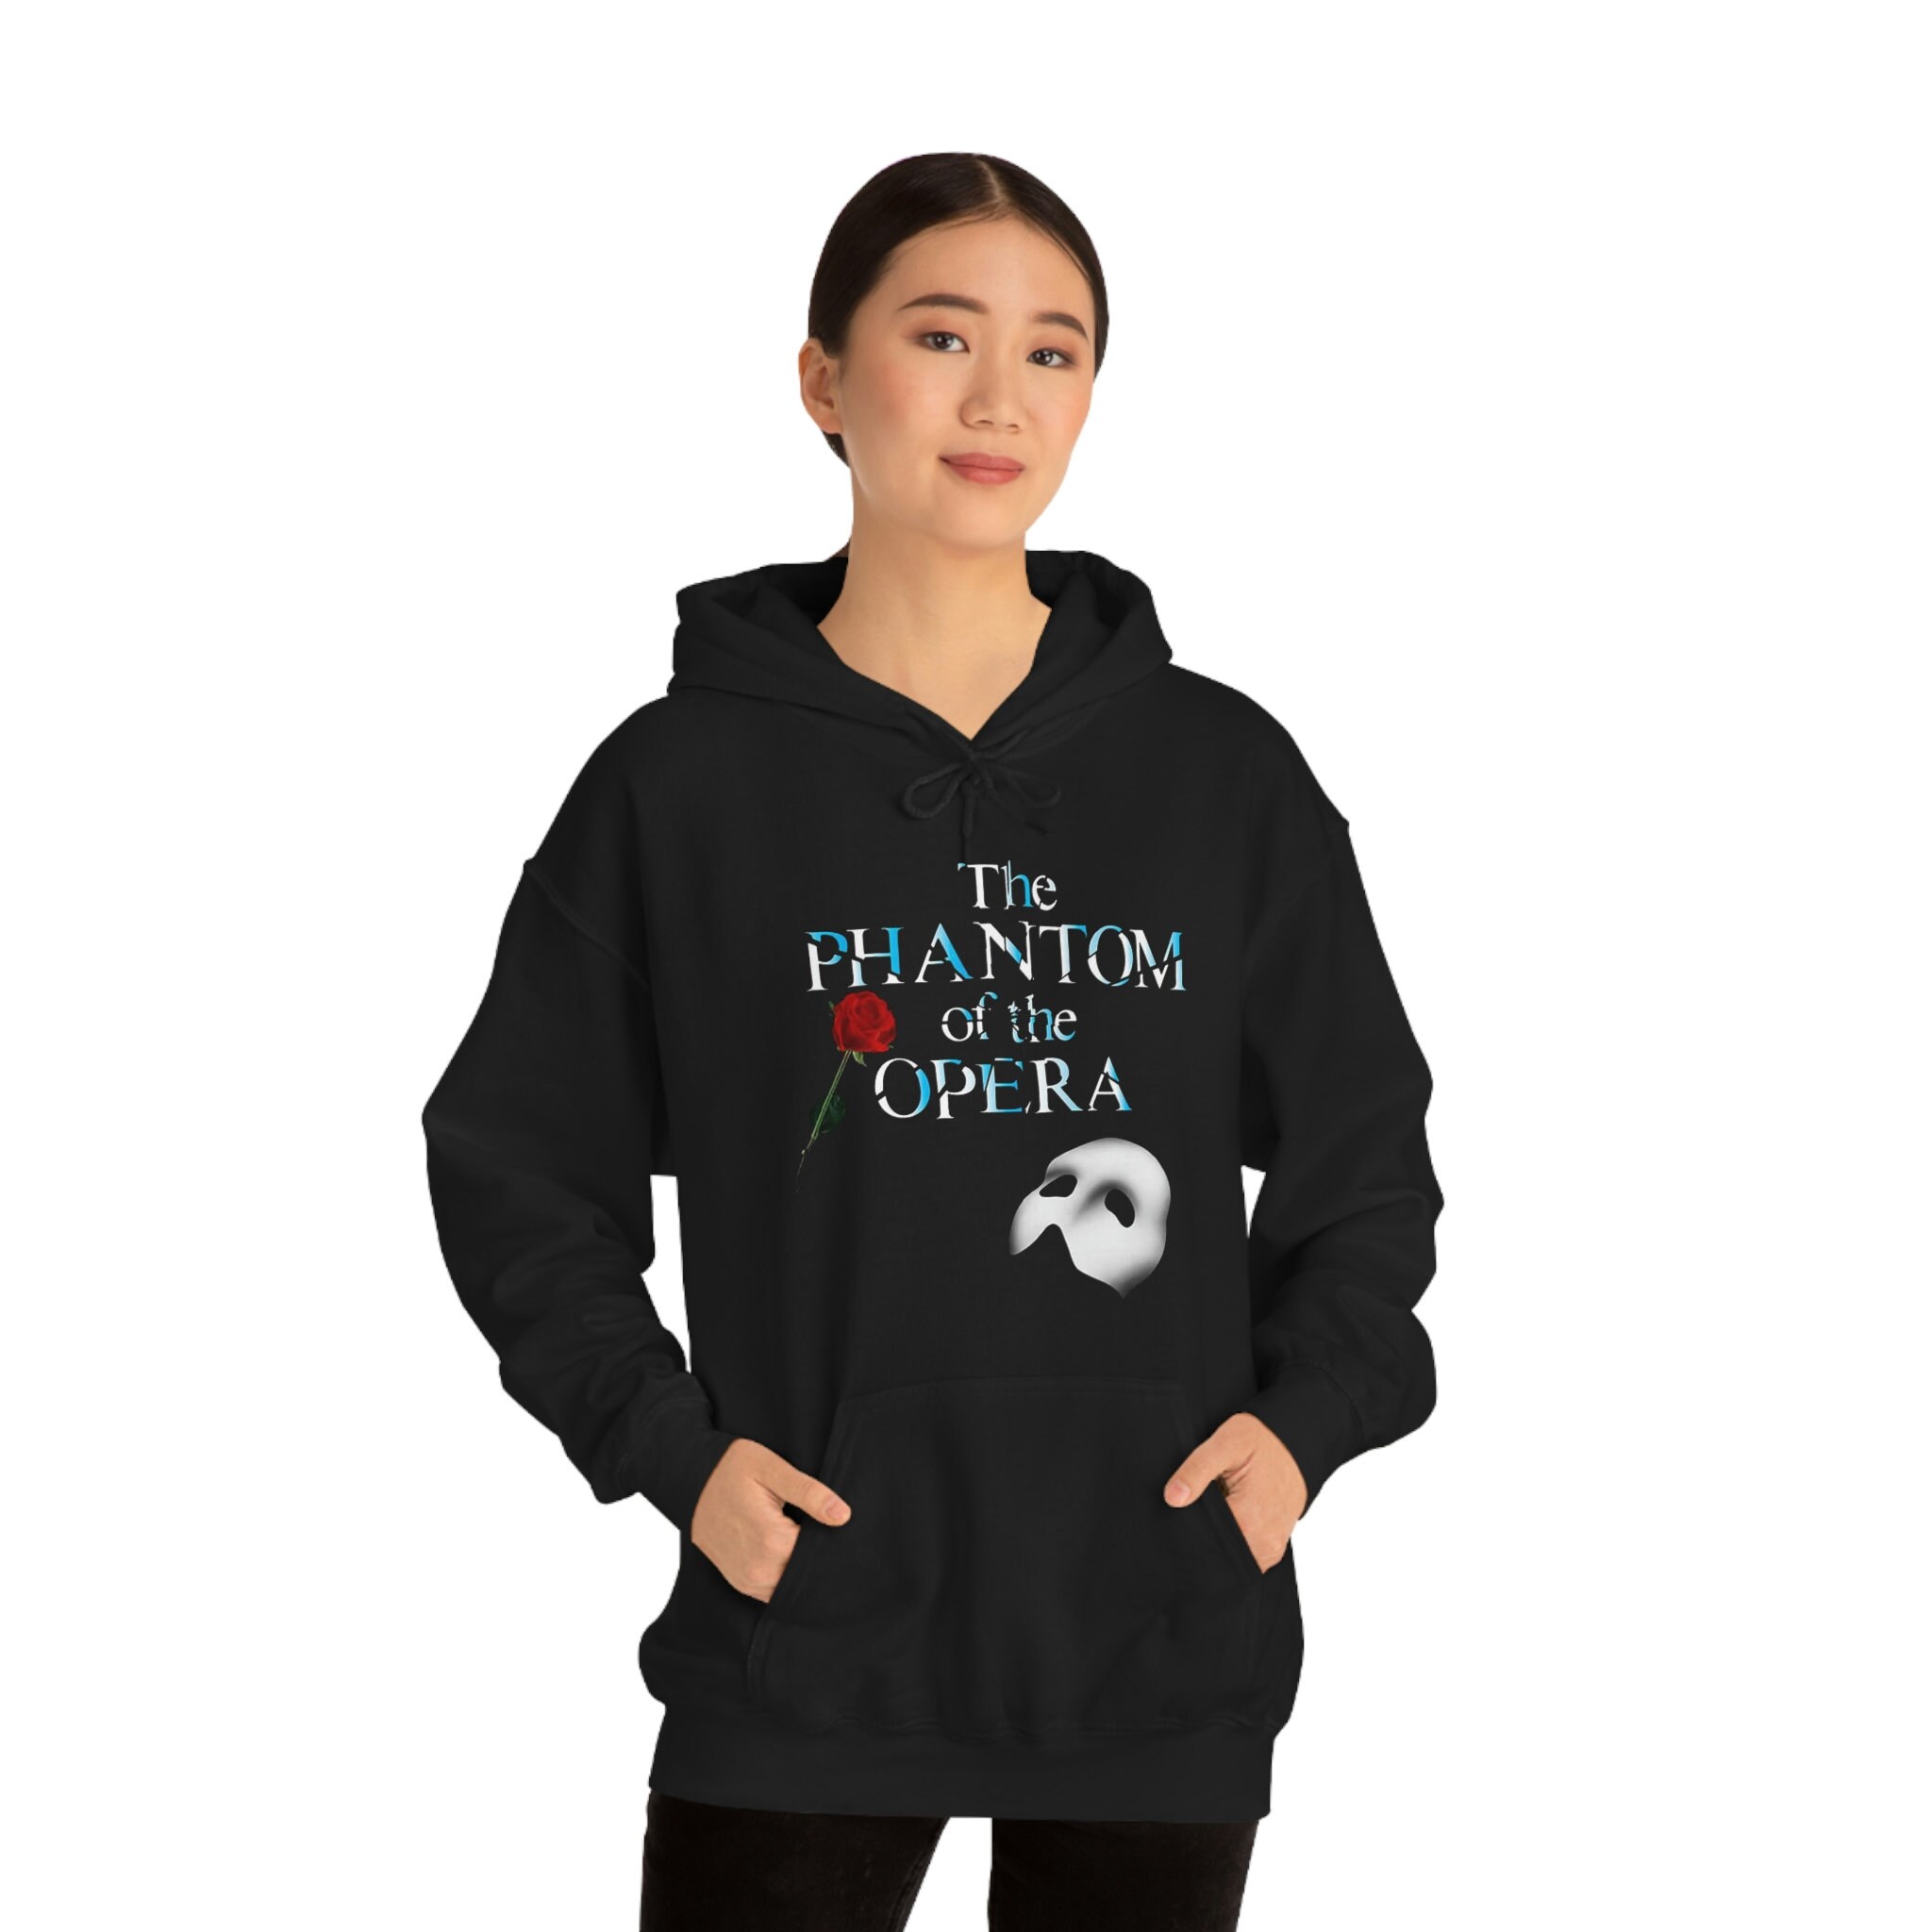 Phantom of the Opera Hoodie, You Are Going to See, Theatre Ticket